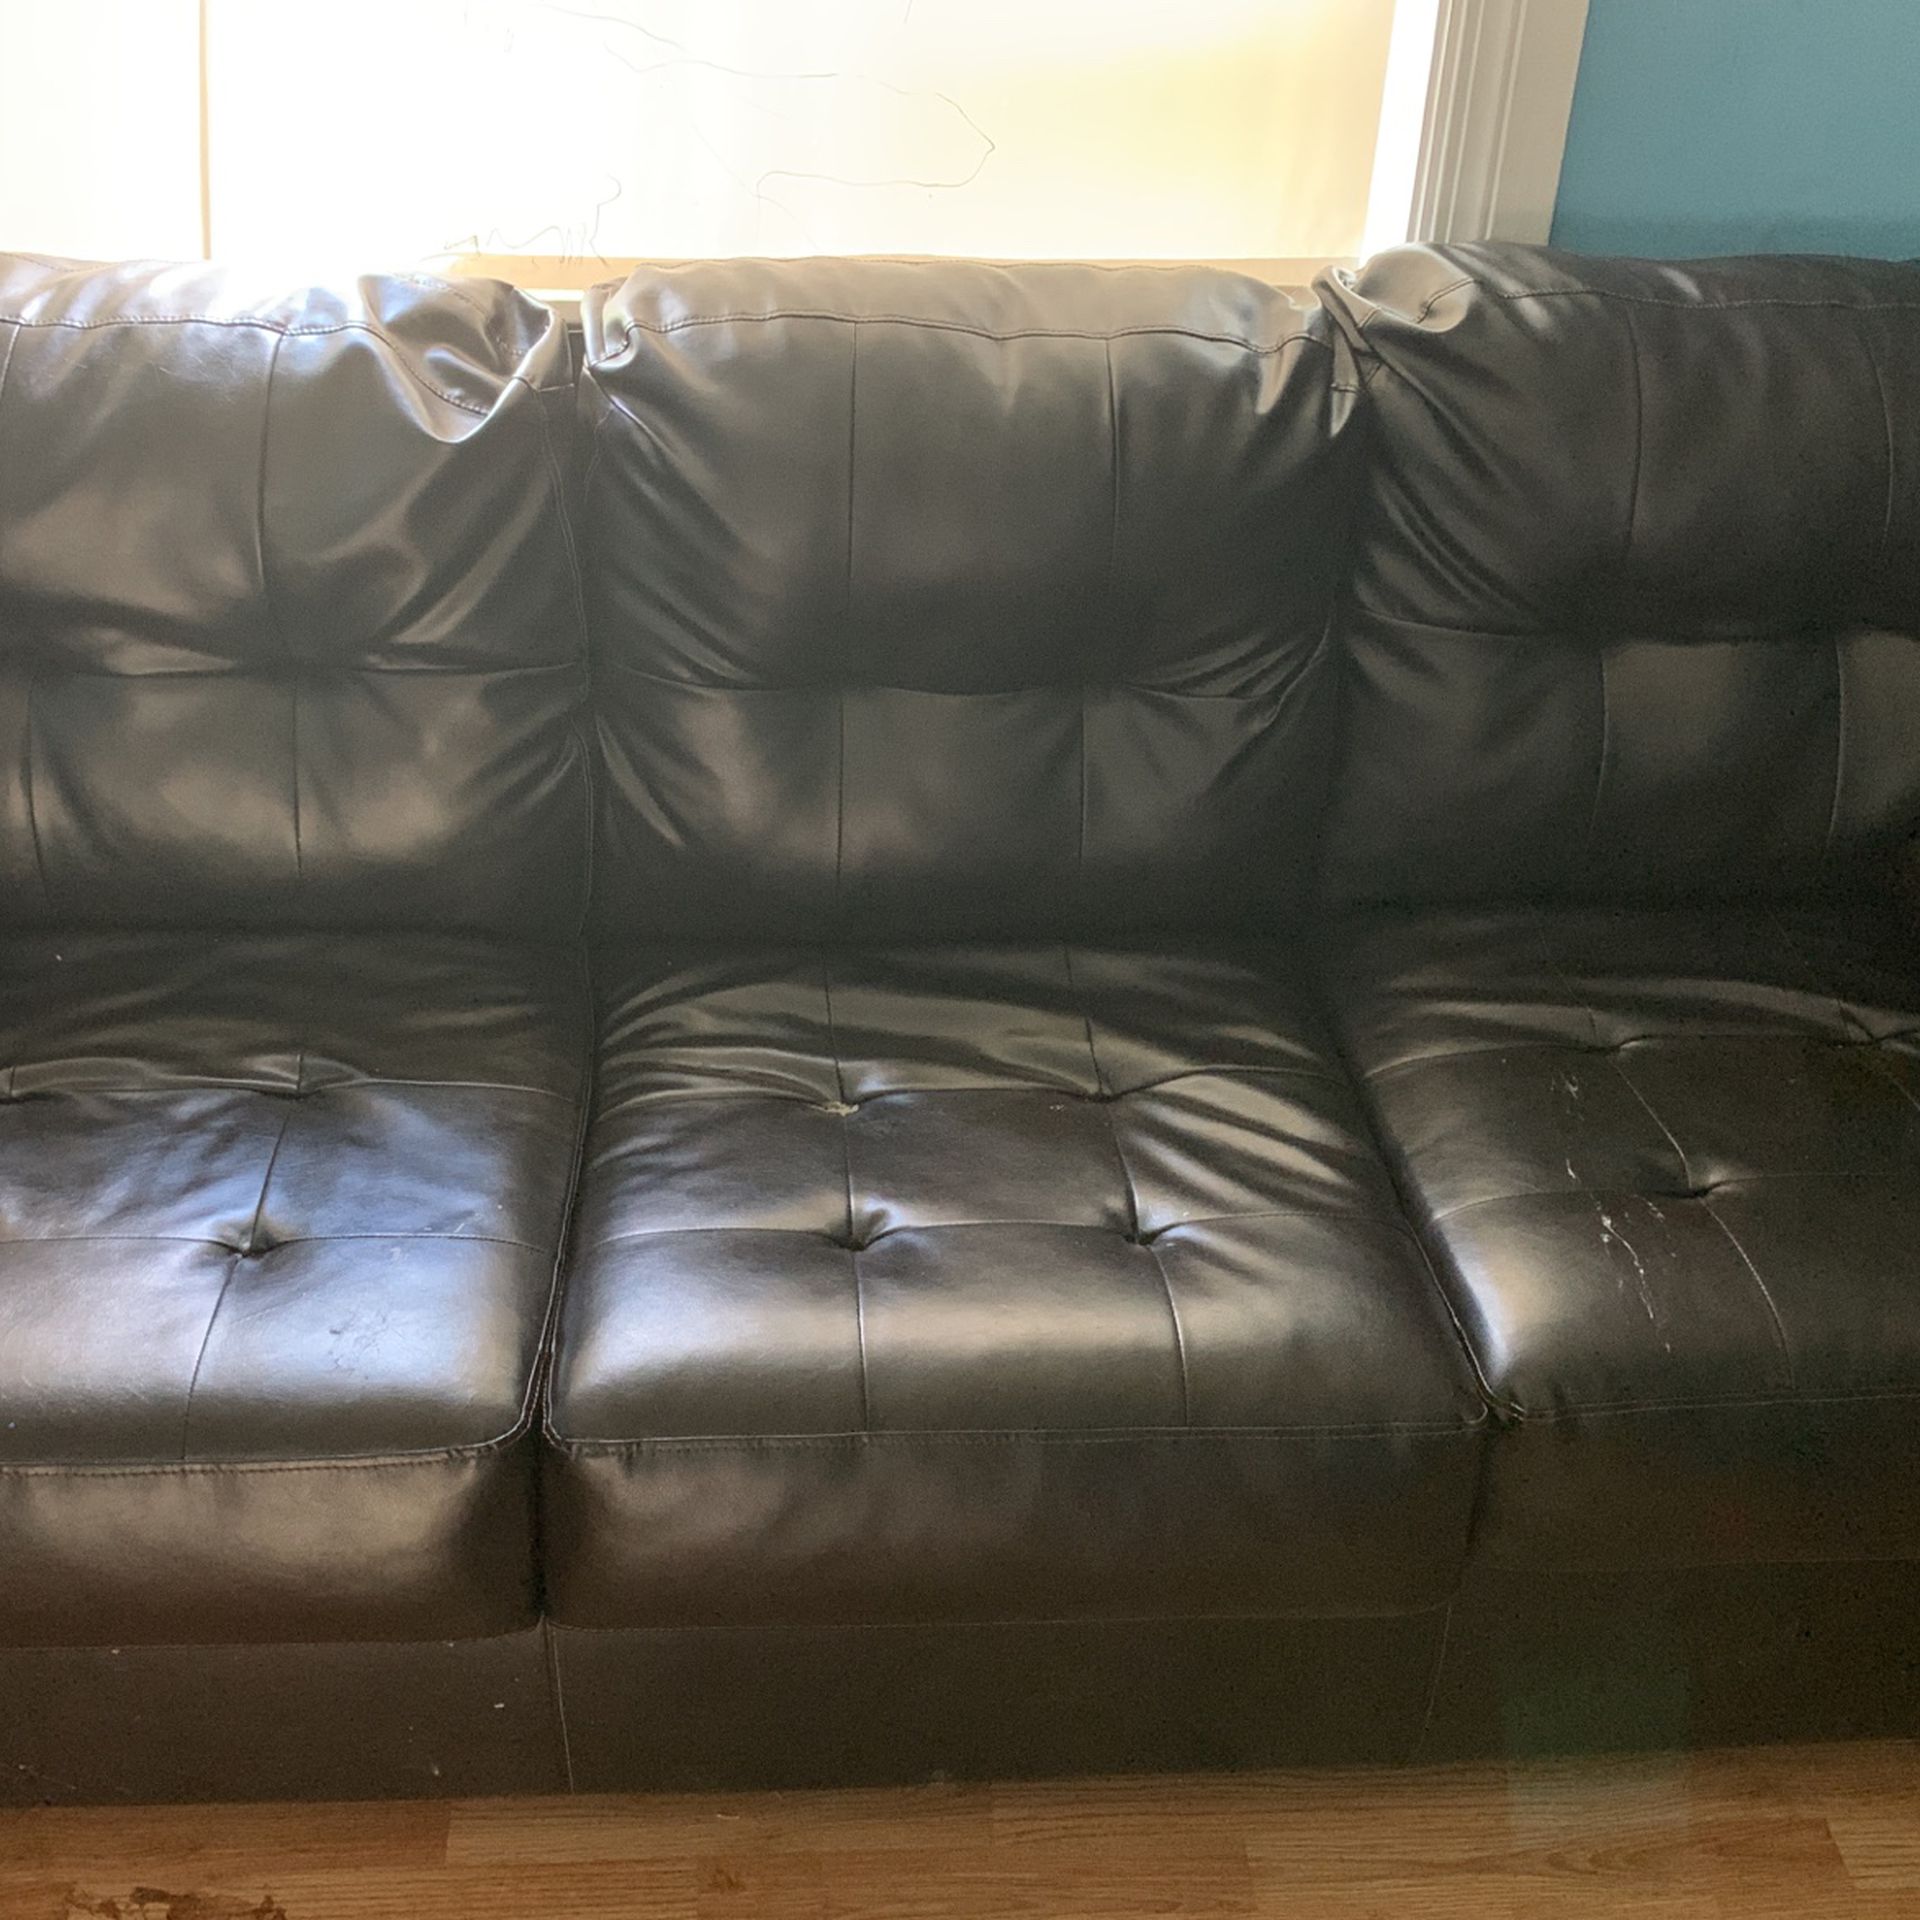 Black Leather Sofa Bed